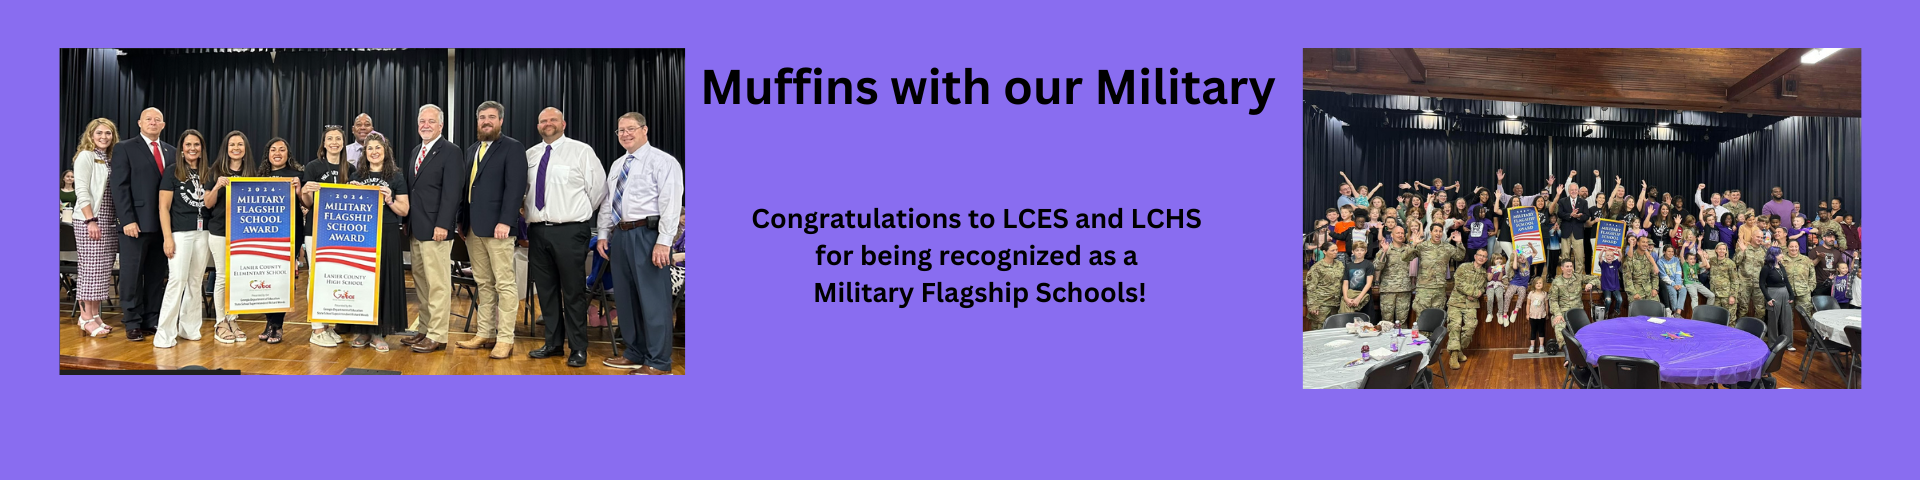 Pictures of Muffins with Military